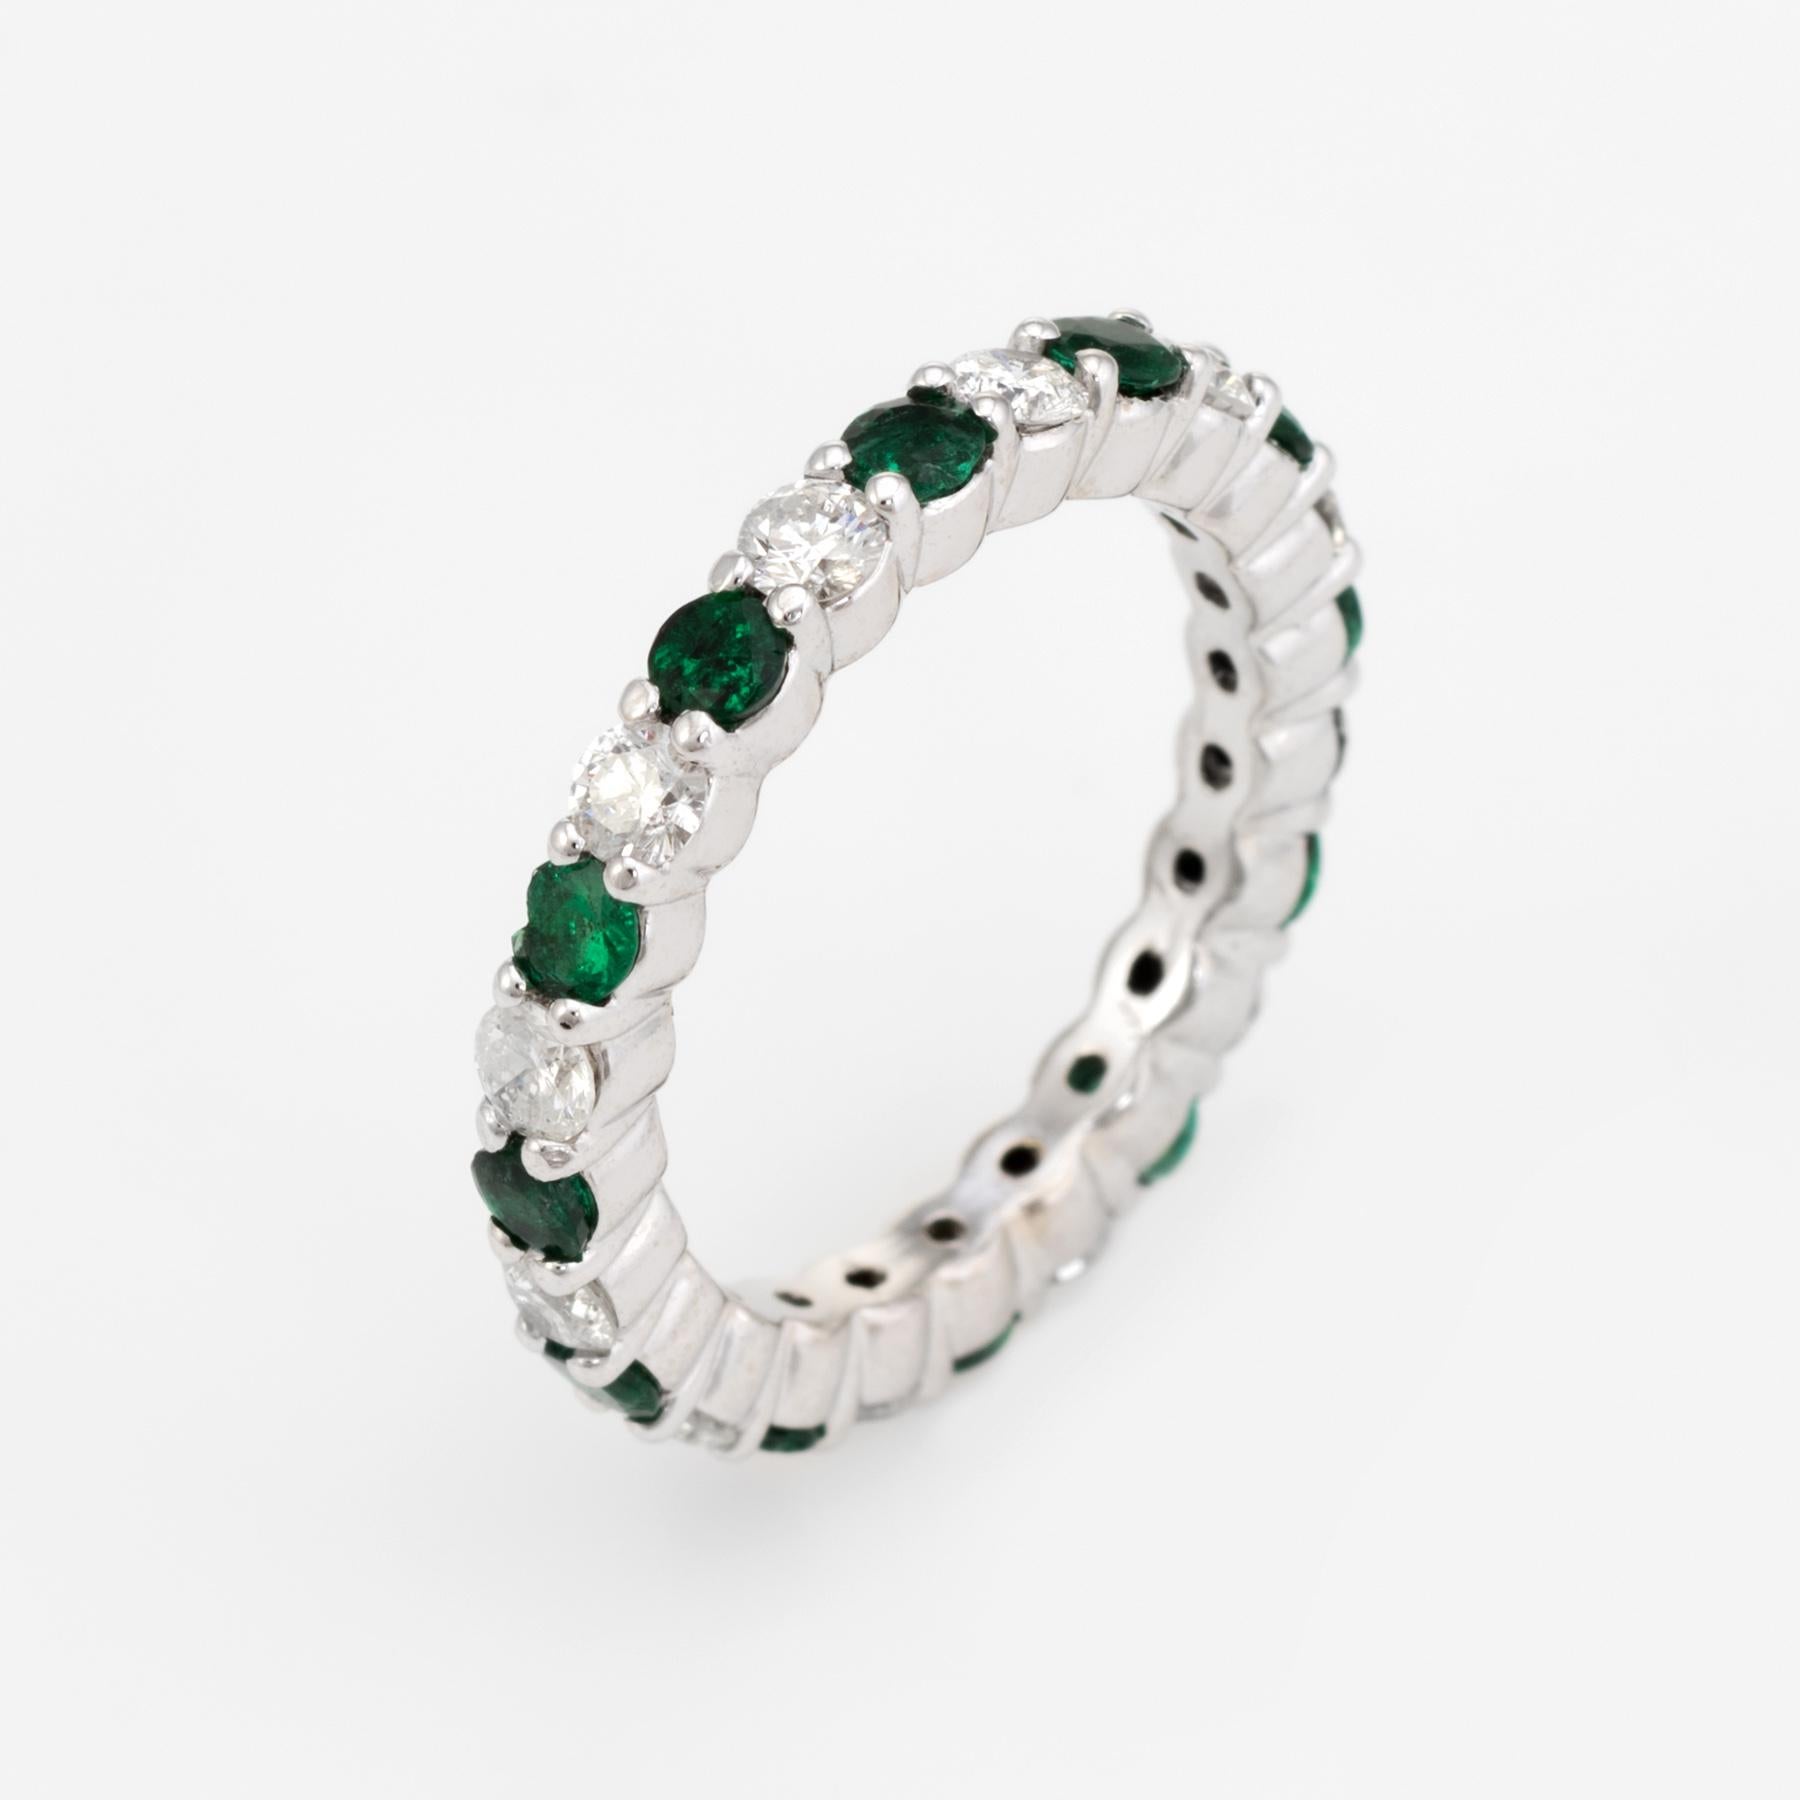 Elegant estate eternity band, crafted in 14 karat white gold. 

Round cut emeralds total an estimated 1 carat, accented with an estimated 1 carat of diamonds (estimated at H-I color and VS2-SI1 clarity). 

The ring is in excellent condition.